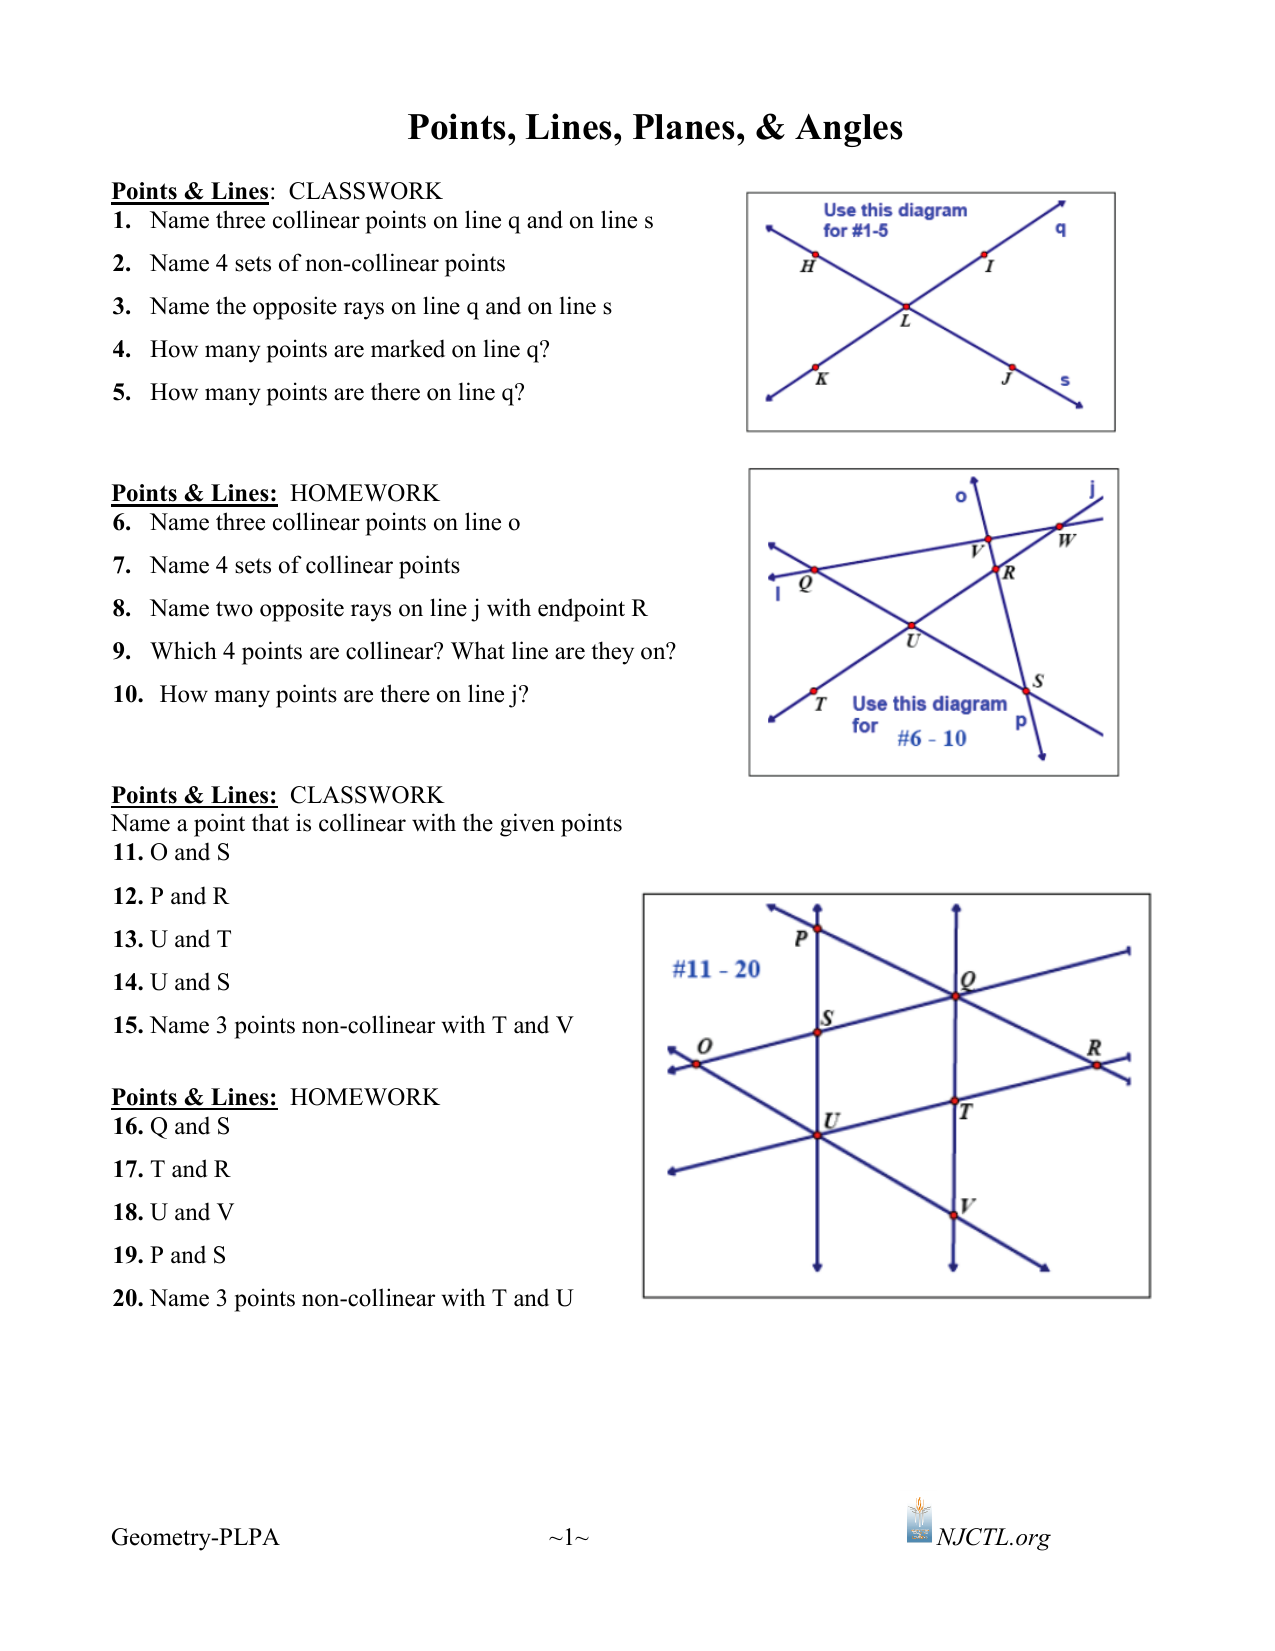 Points lines planes and angles cw hw review and solutions 2014 08 27